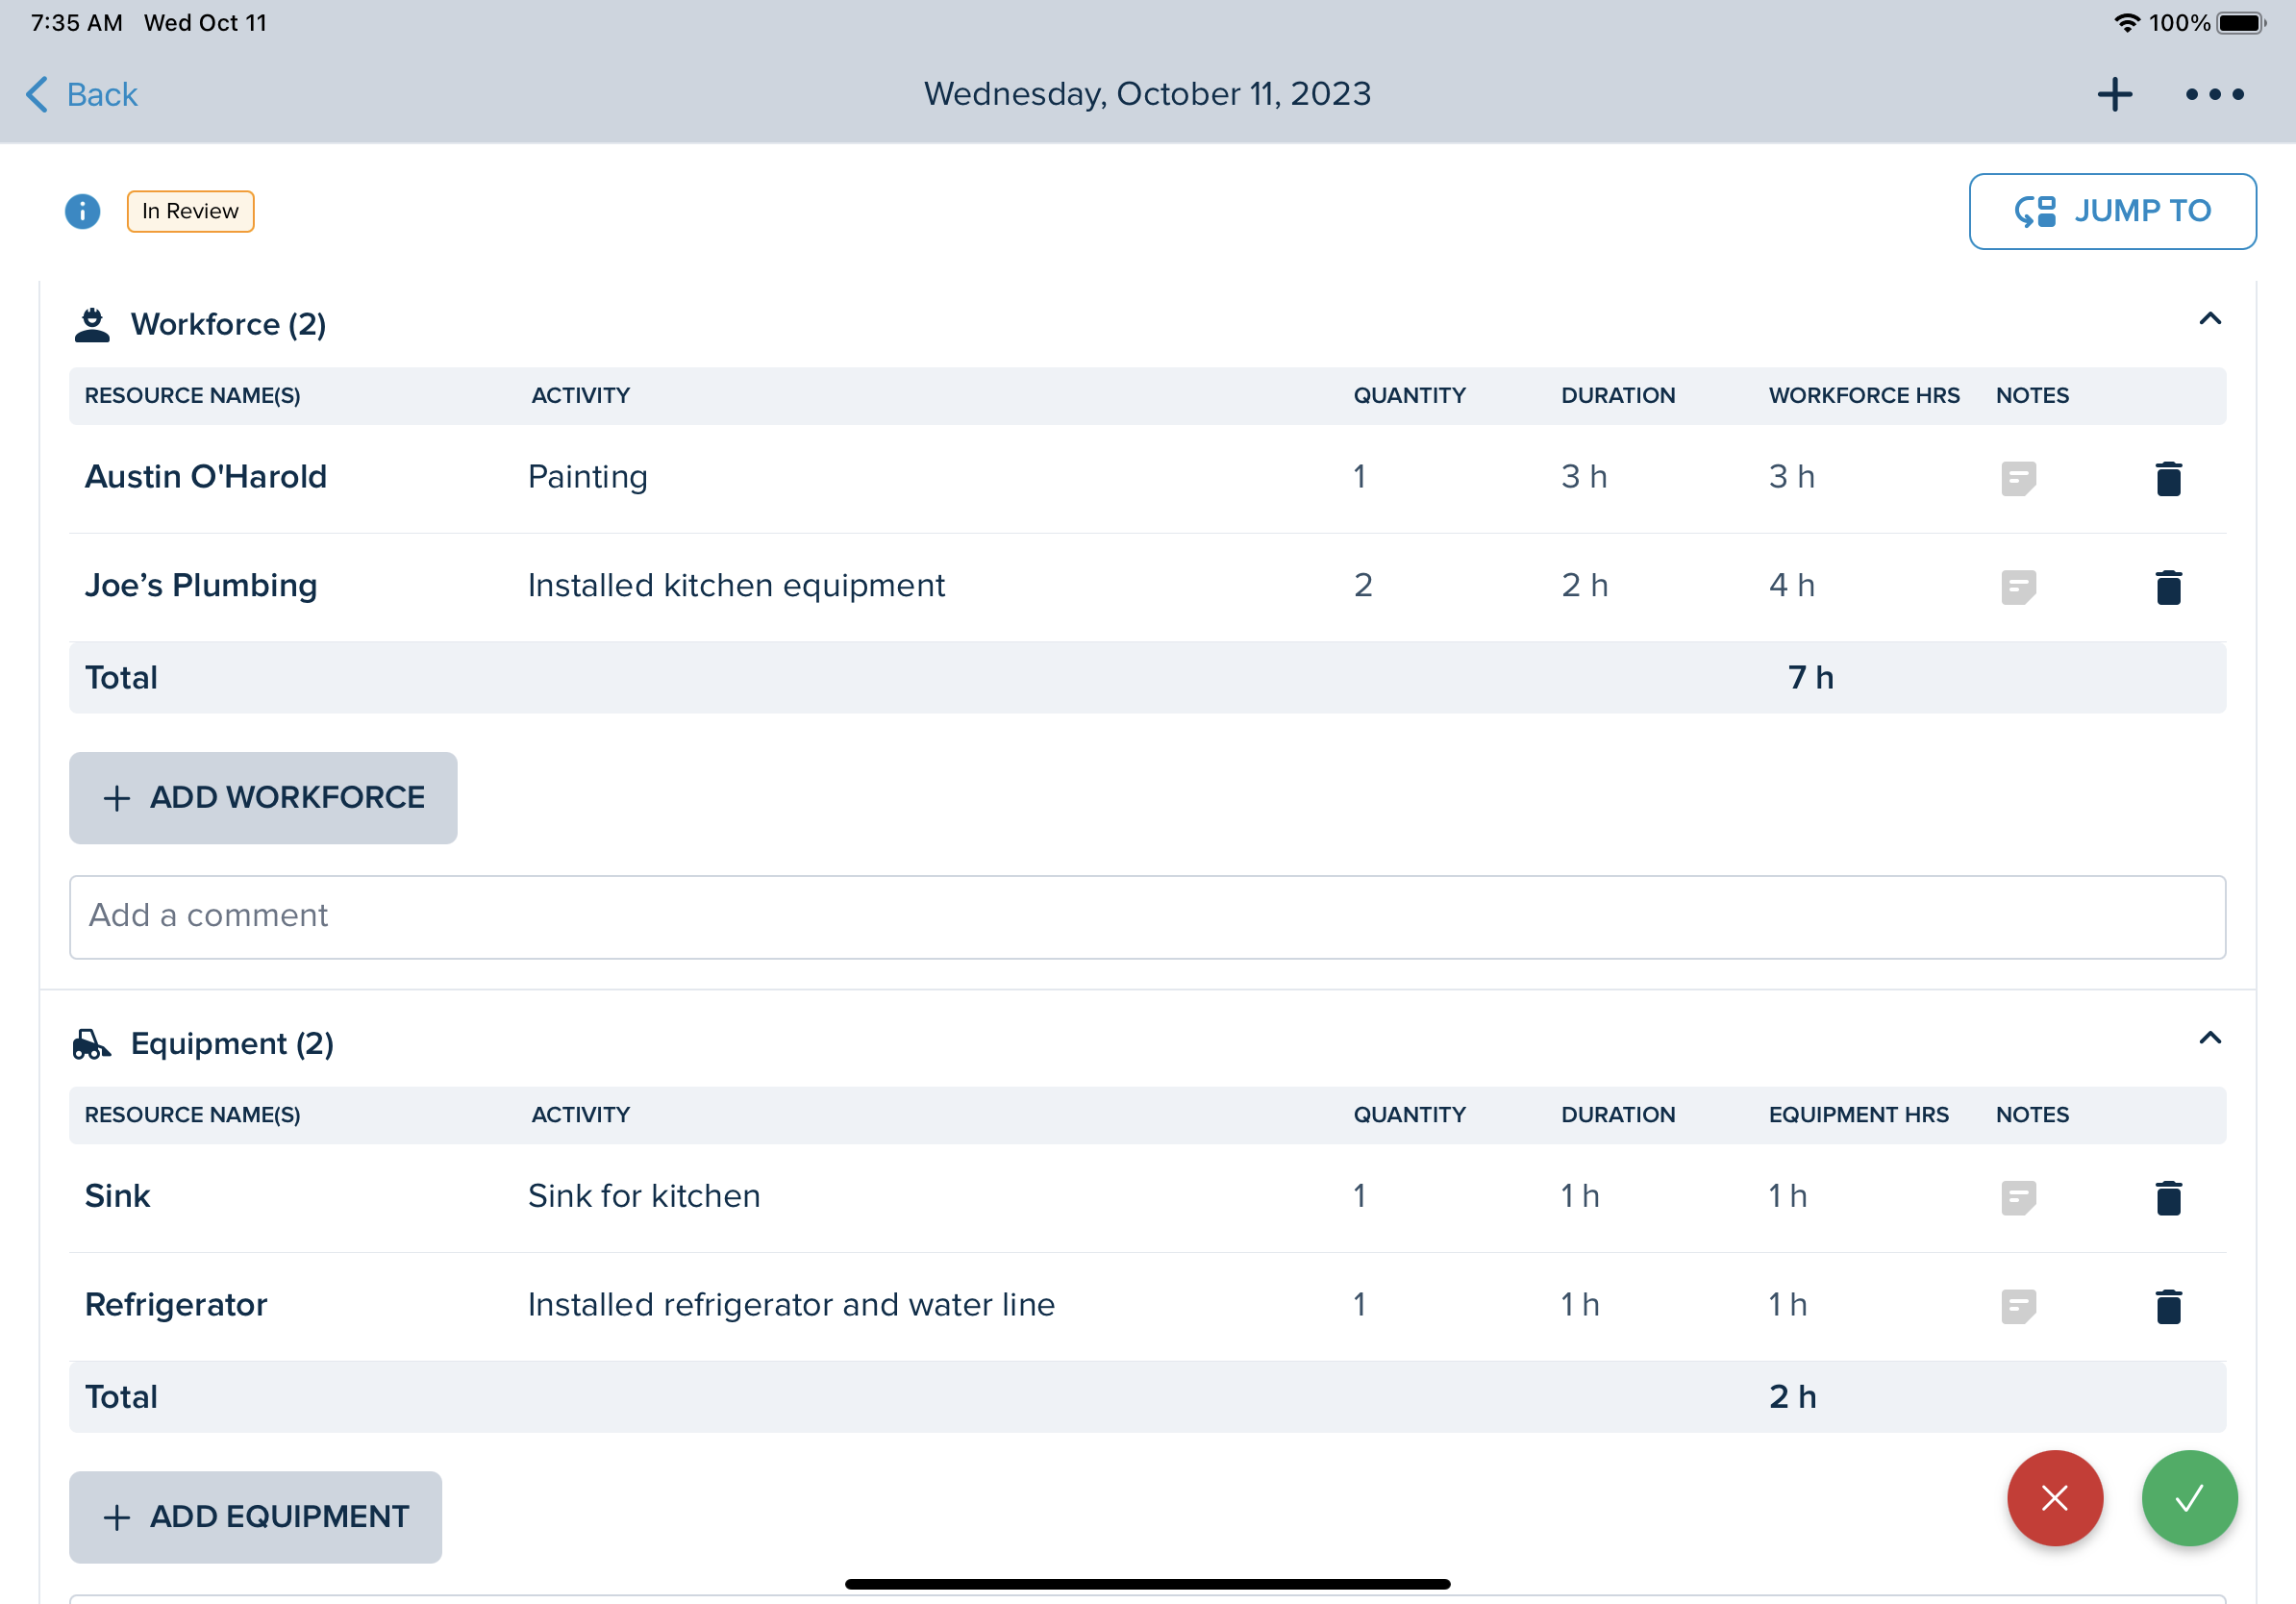 Daily Reports - Track Onsite Workforce